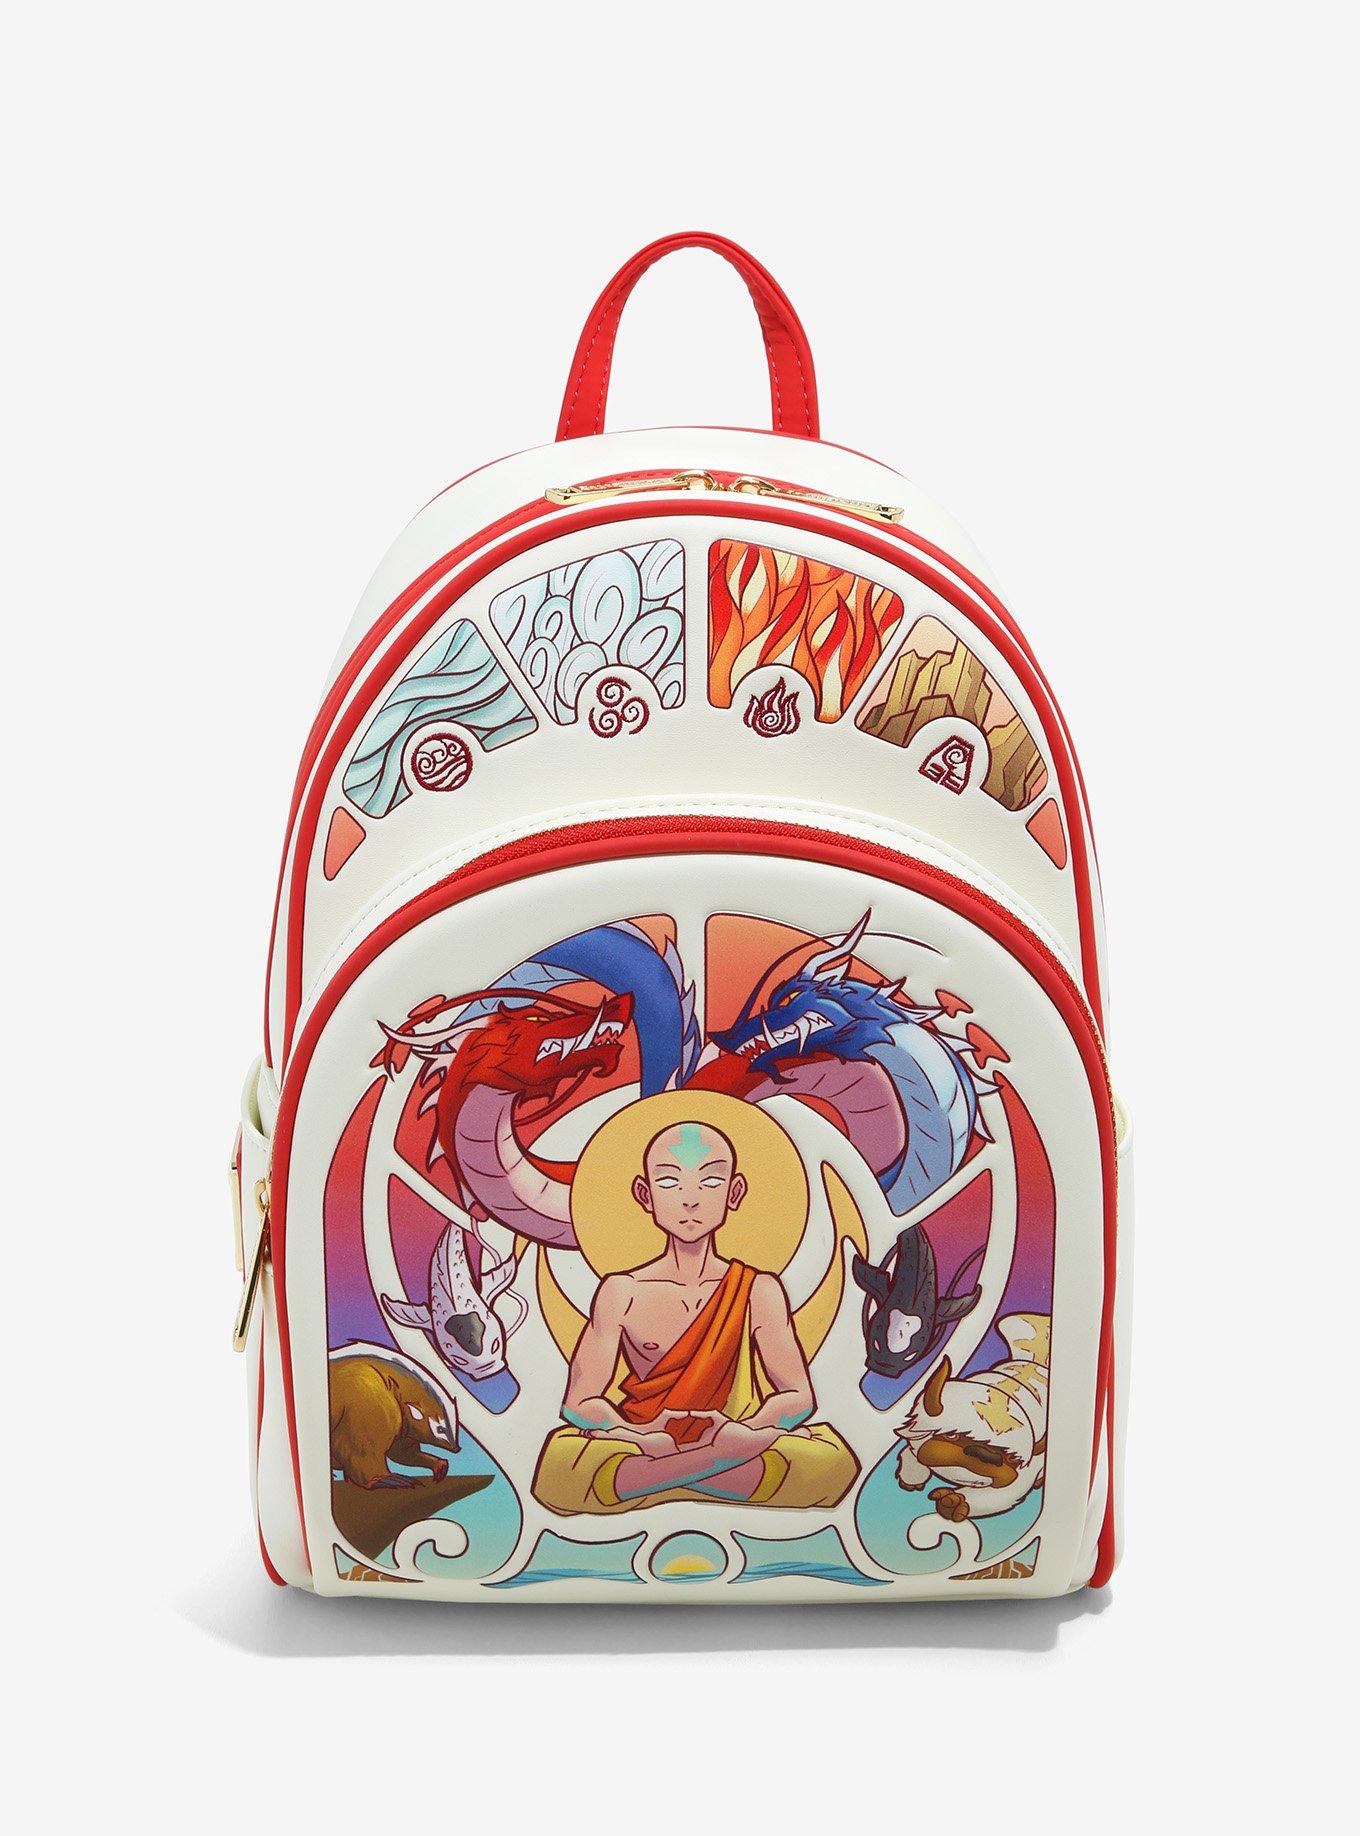 Avatar The Last Airbender The Fire Dance Mini Backpack